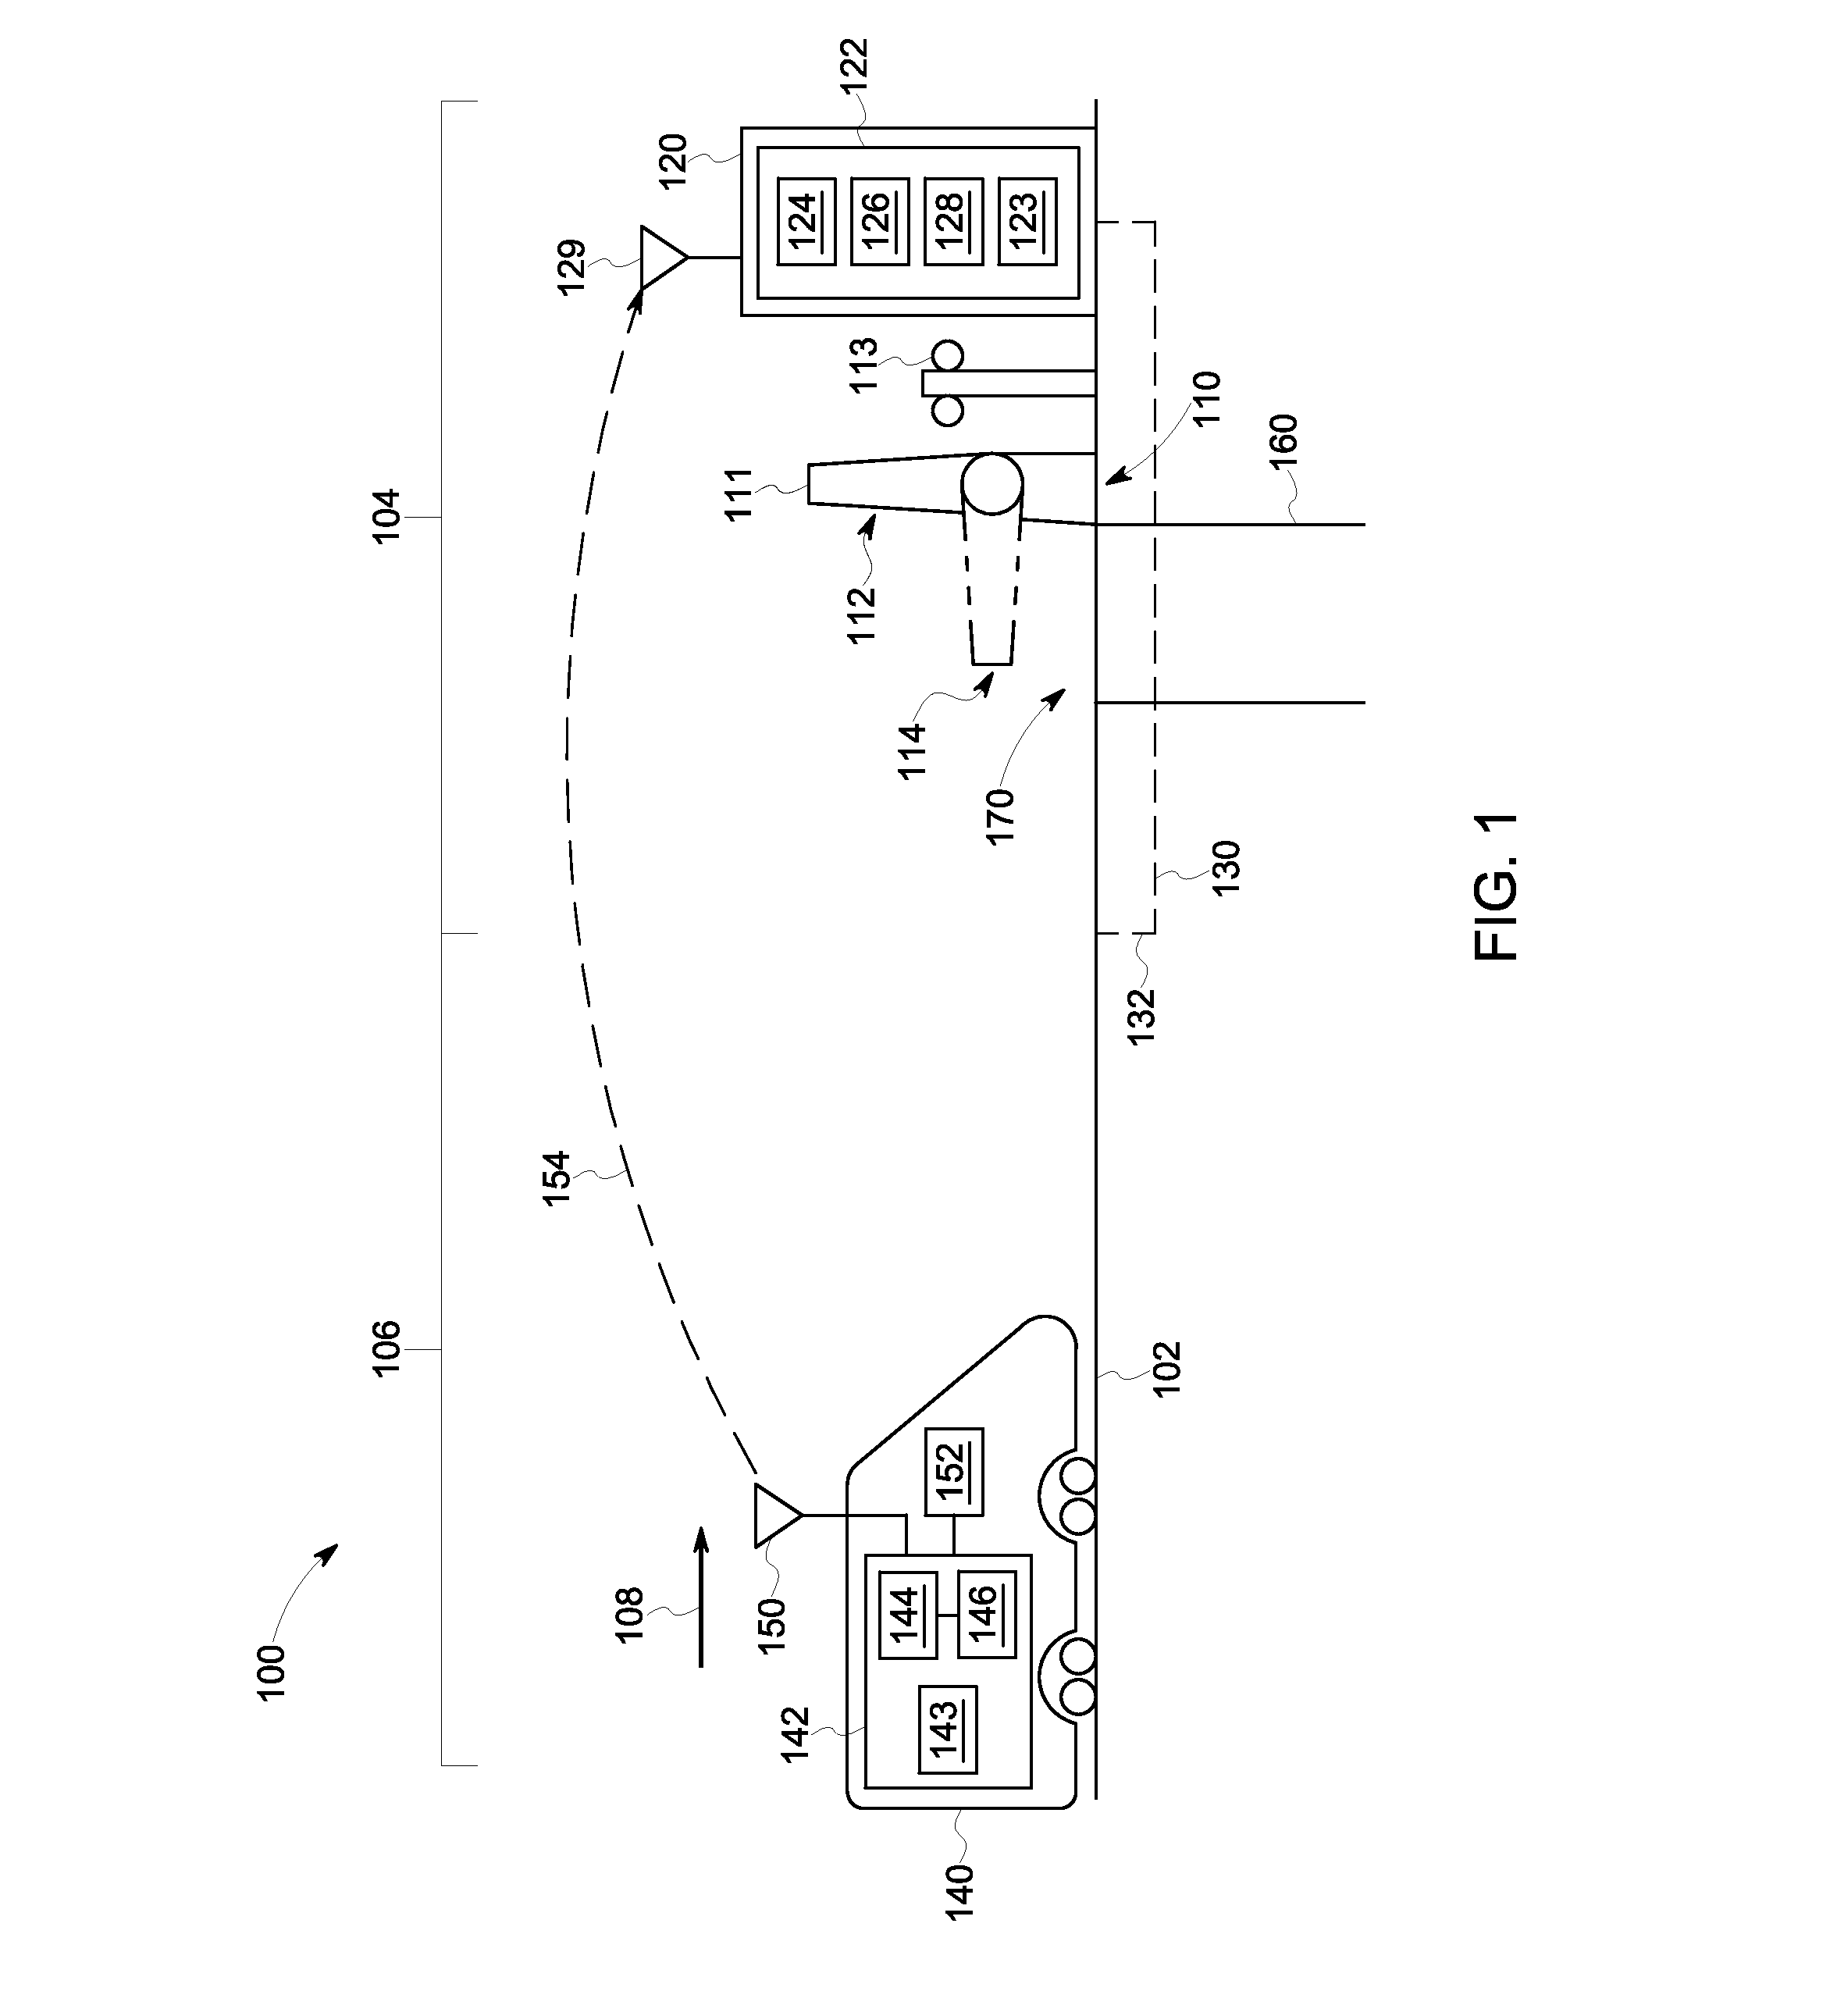 Systems and method for controlling warnings at vehicle crossings